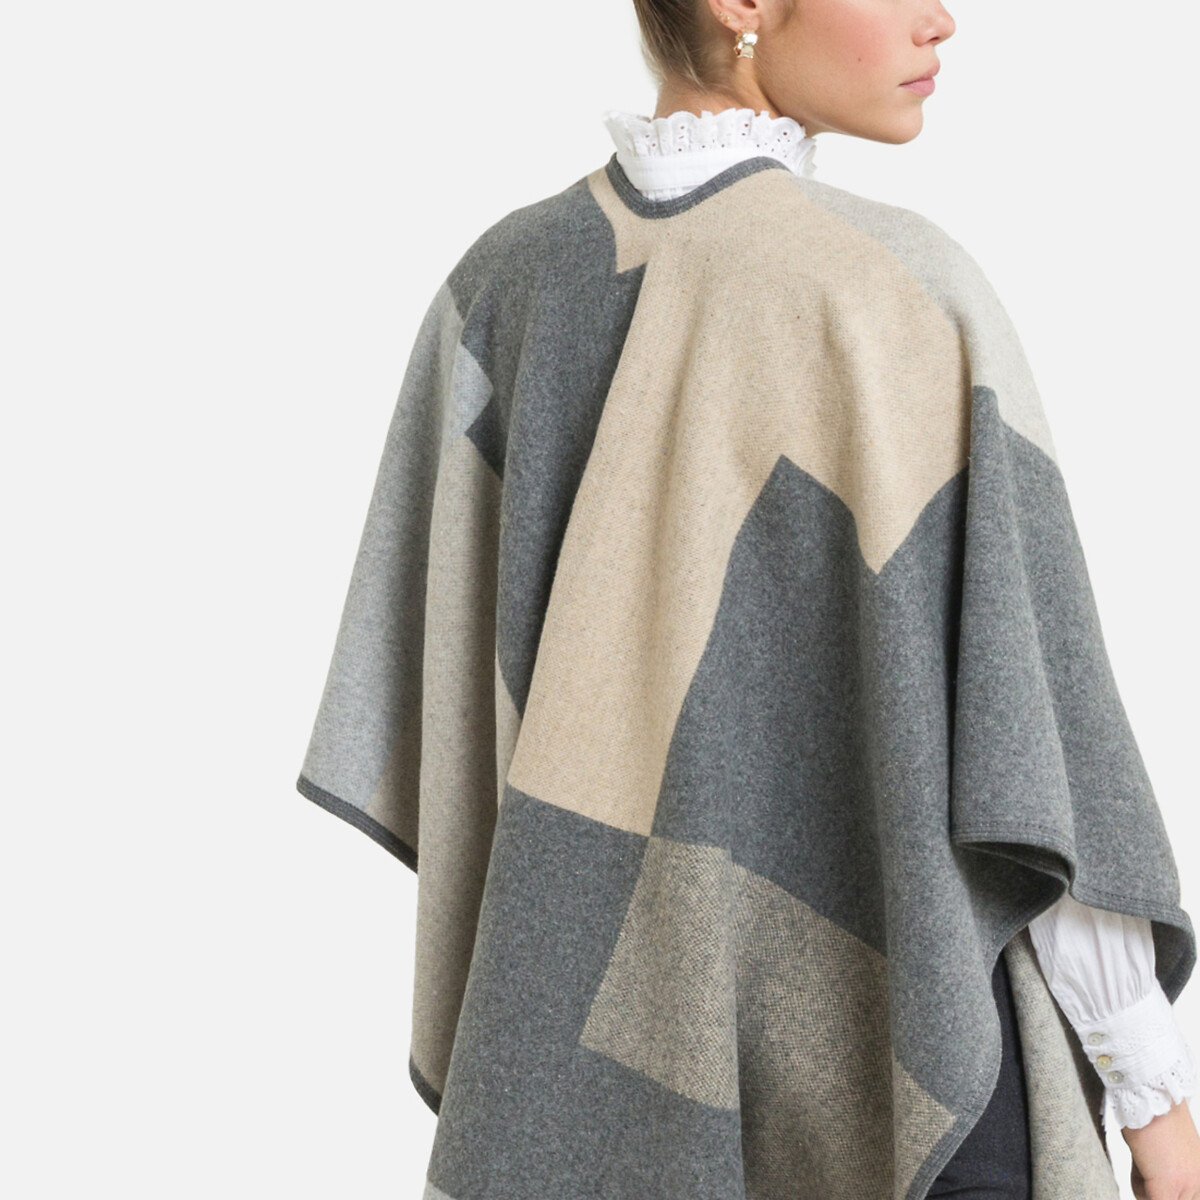 Fisherman two weeks administration Poncho cinzento claro La Redoute Collections | La Redoute